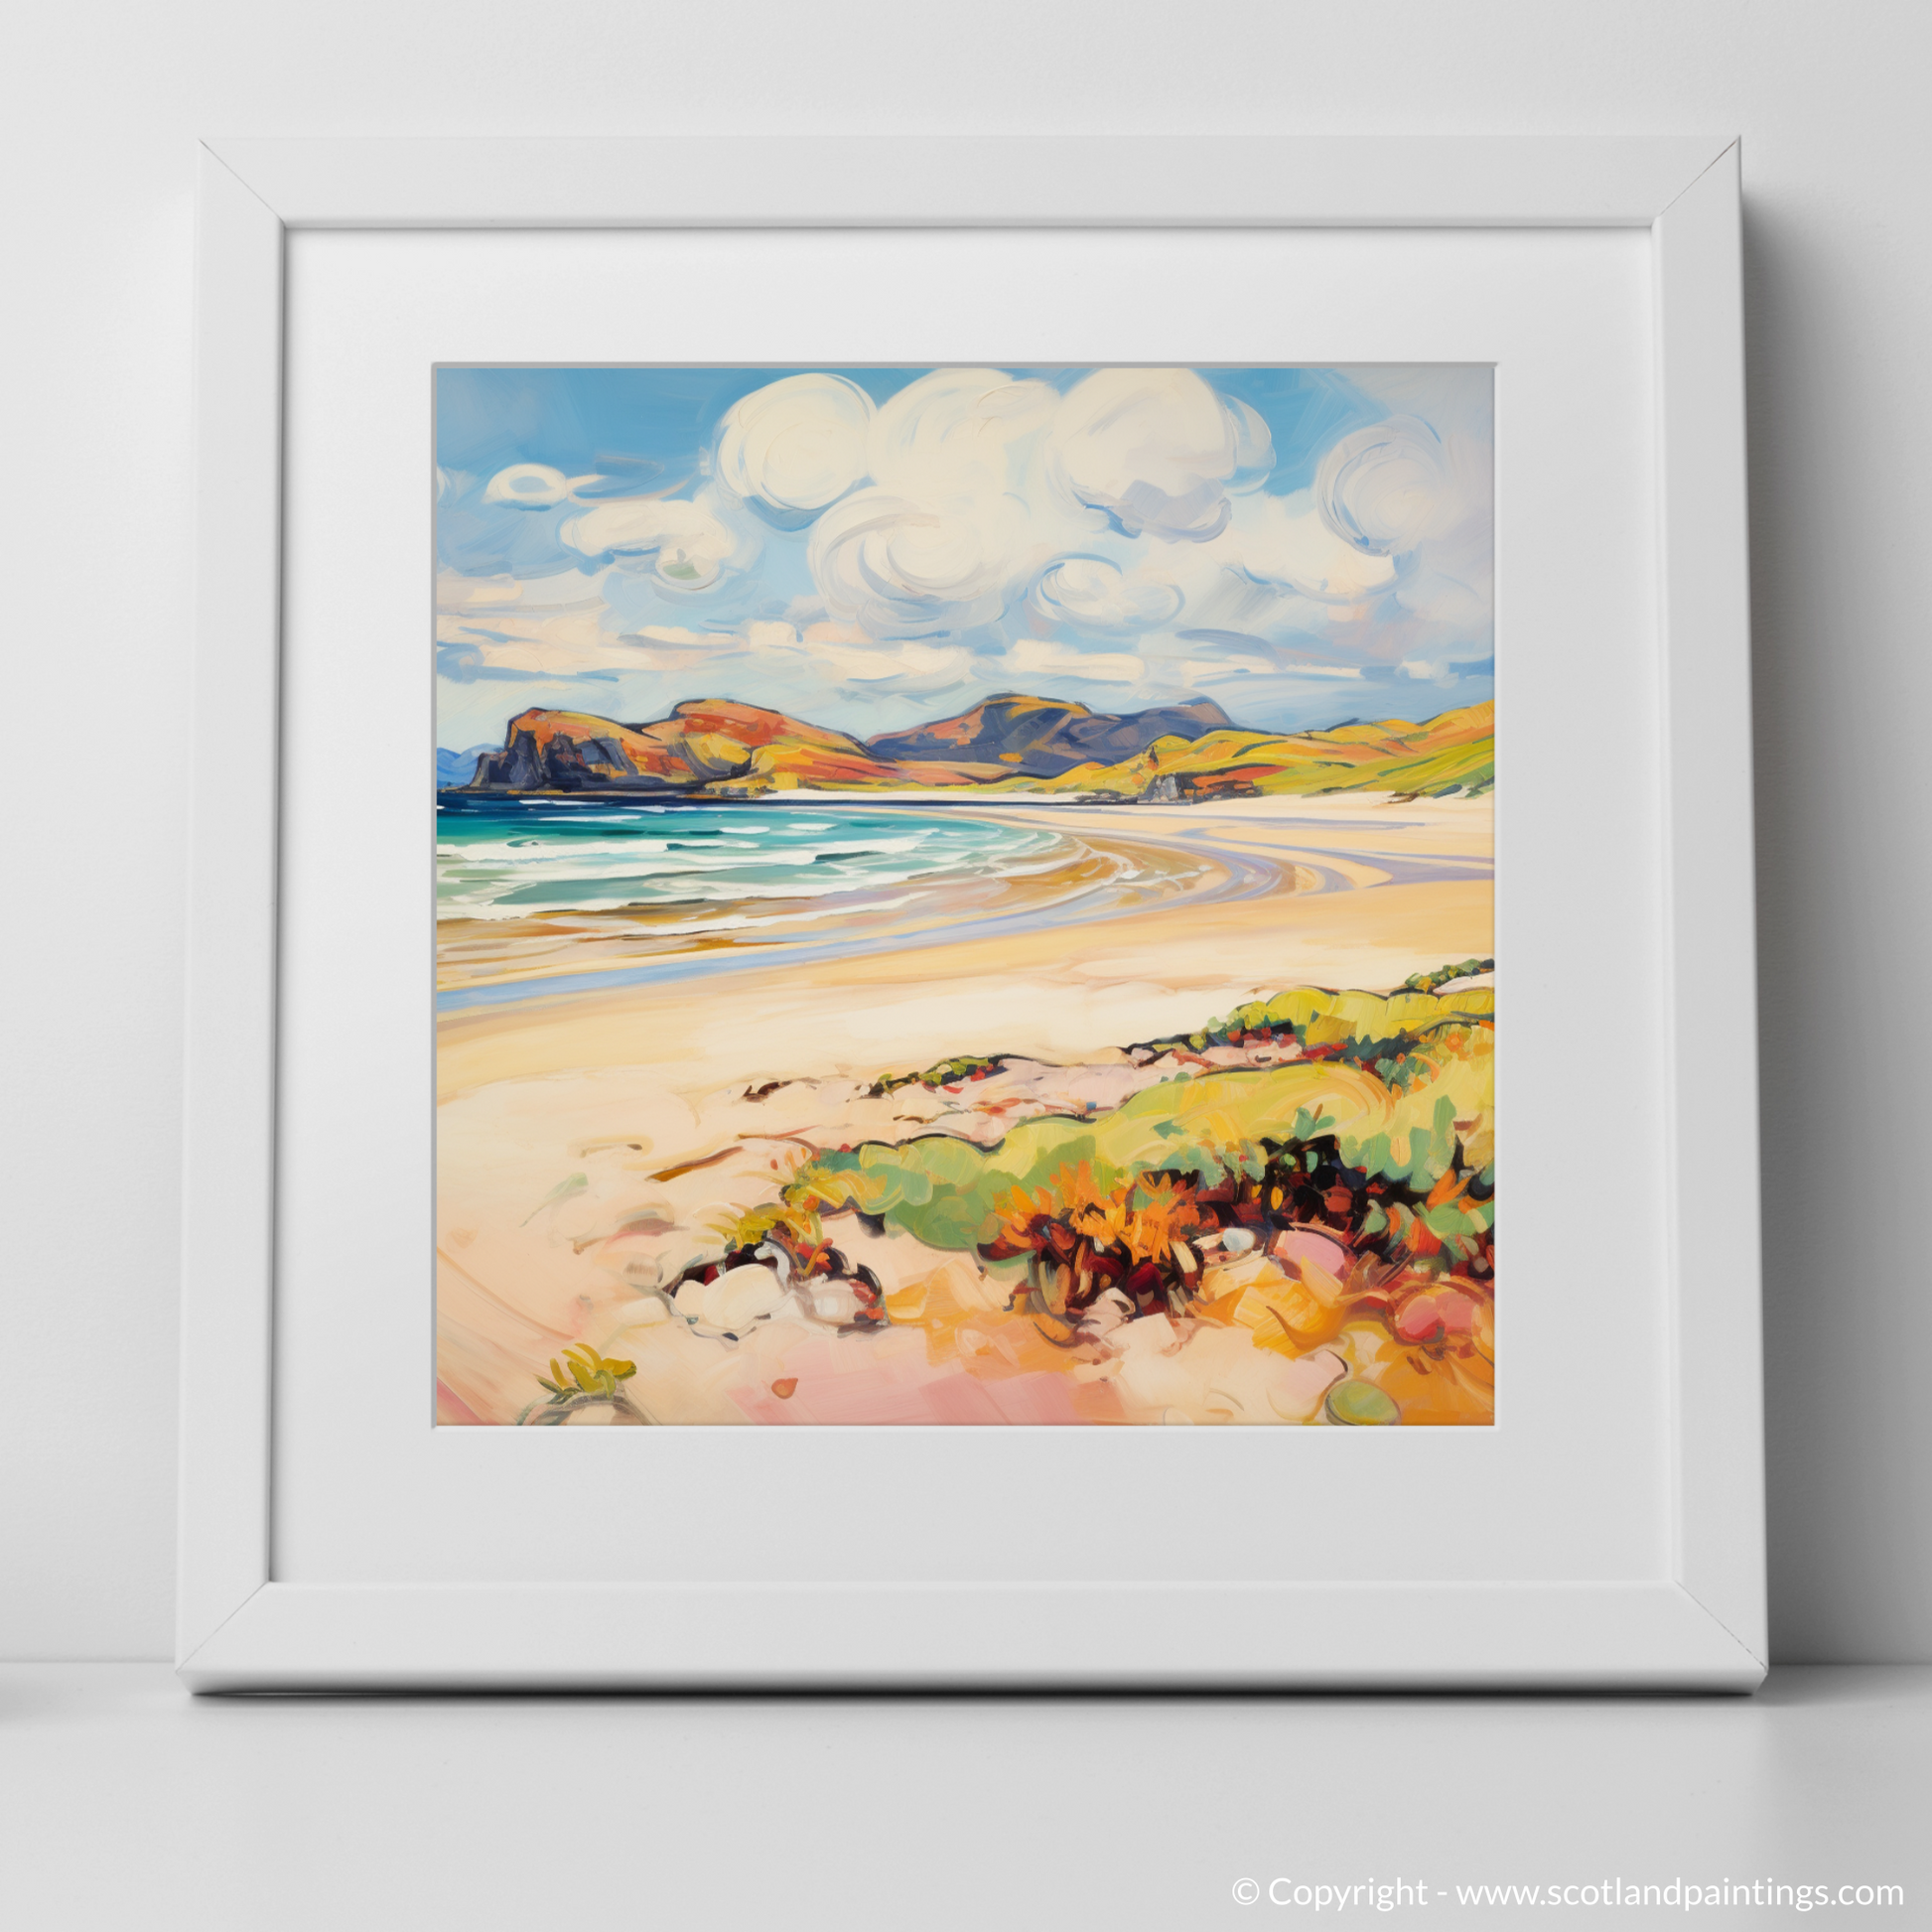 Art Print of Sandwood Bay, Sutherland in summer with a white frame